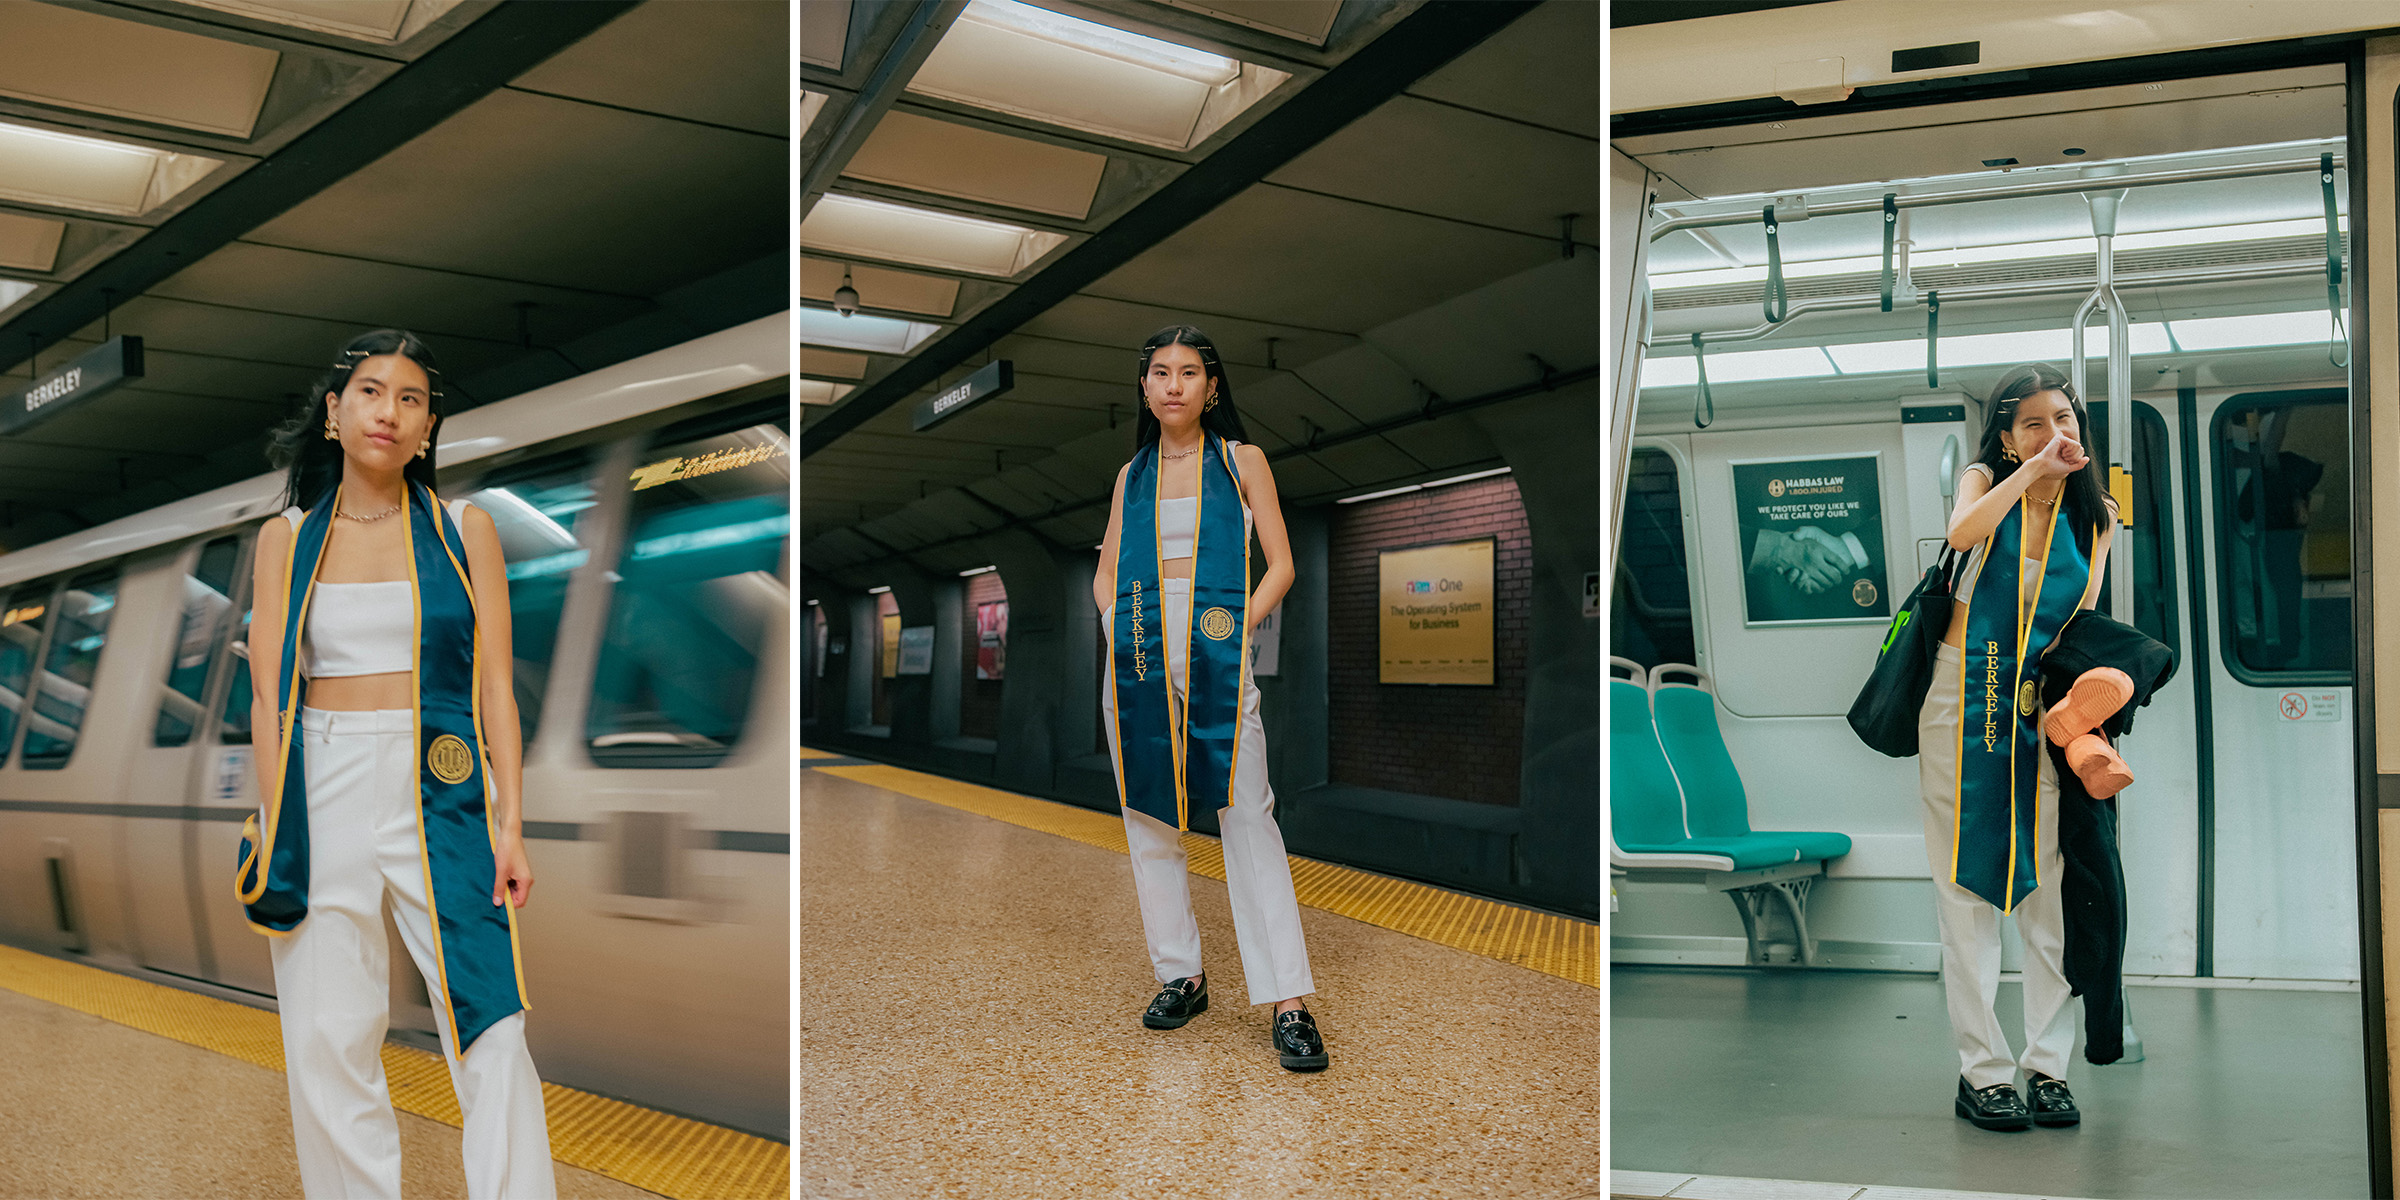 Kiana Leong pictured in her graduation photos at Downtown Berkeley Station. Photos courtesy of Julianne Han.